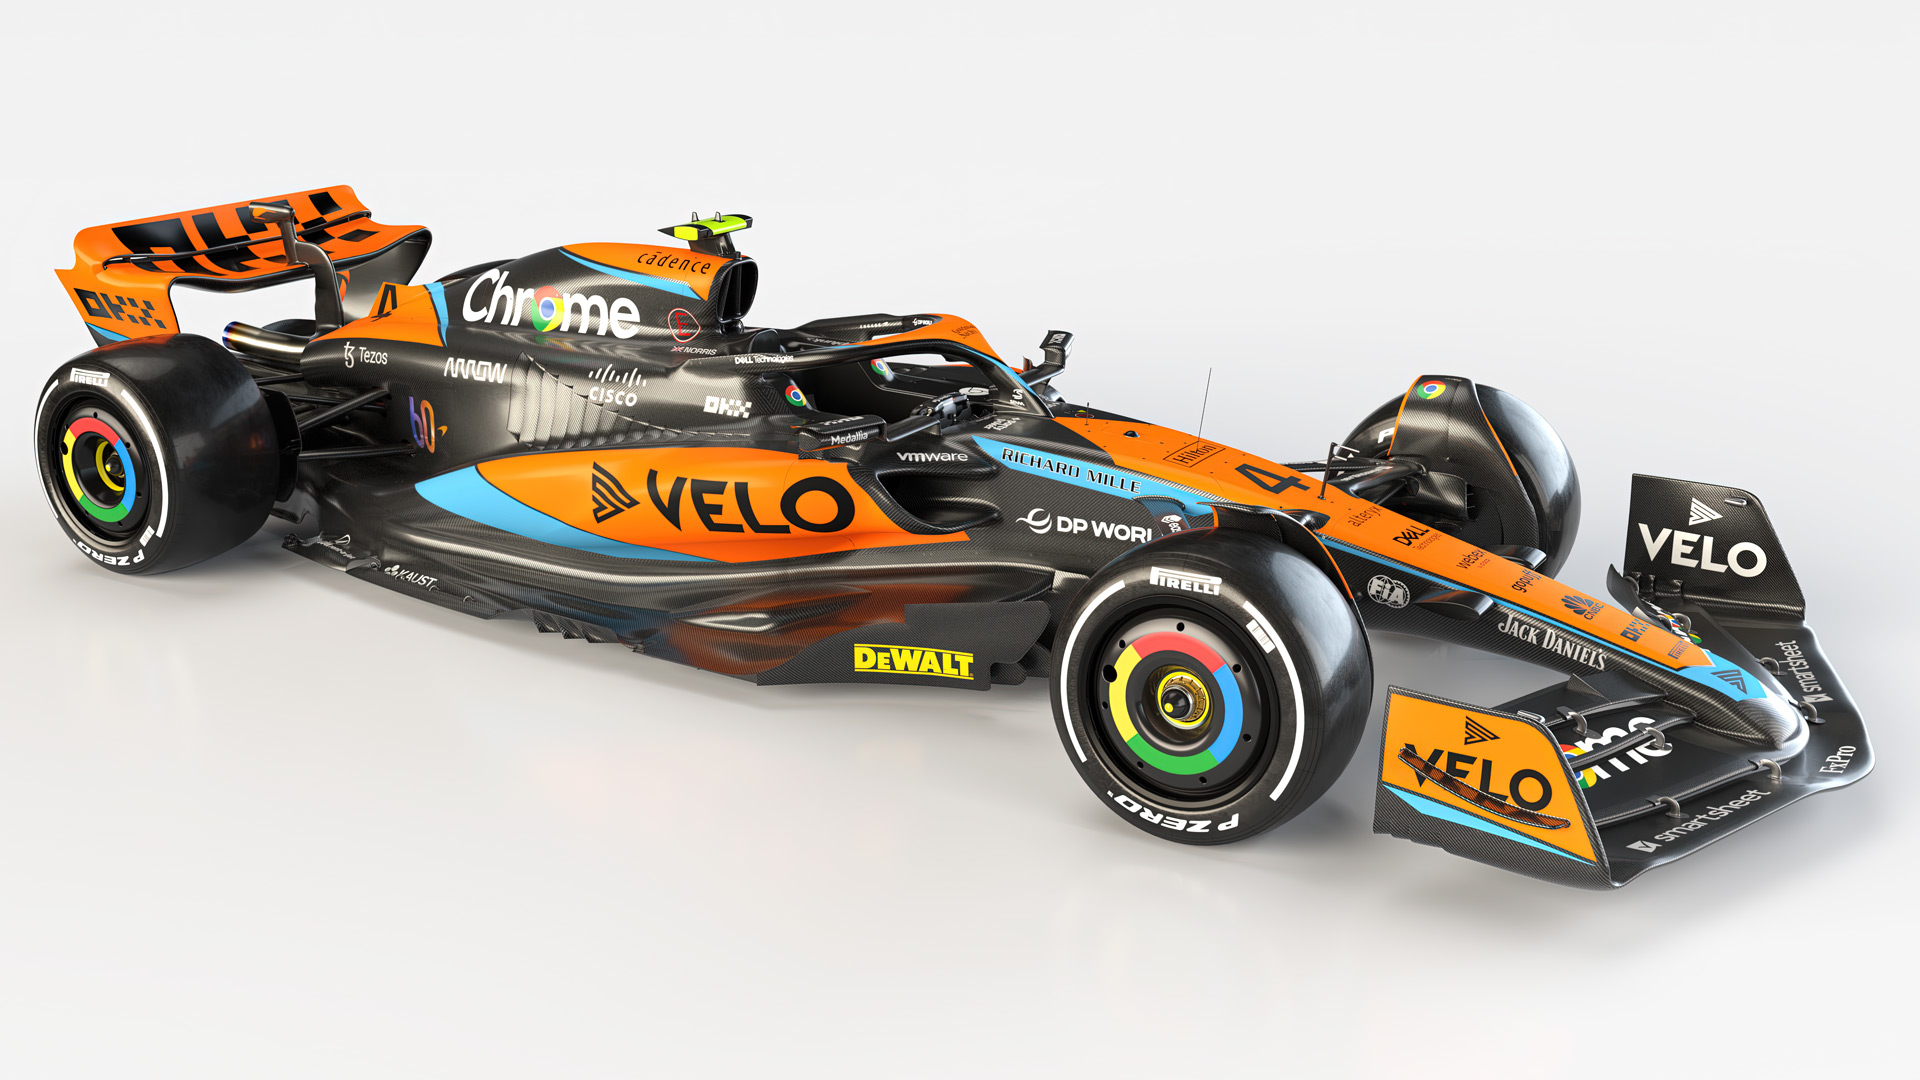 GALLERY: Take a closer look at McLaren's new MCL60 car and livery for the 2023 F1 season. Formula 1®